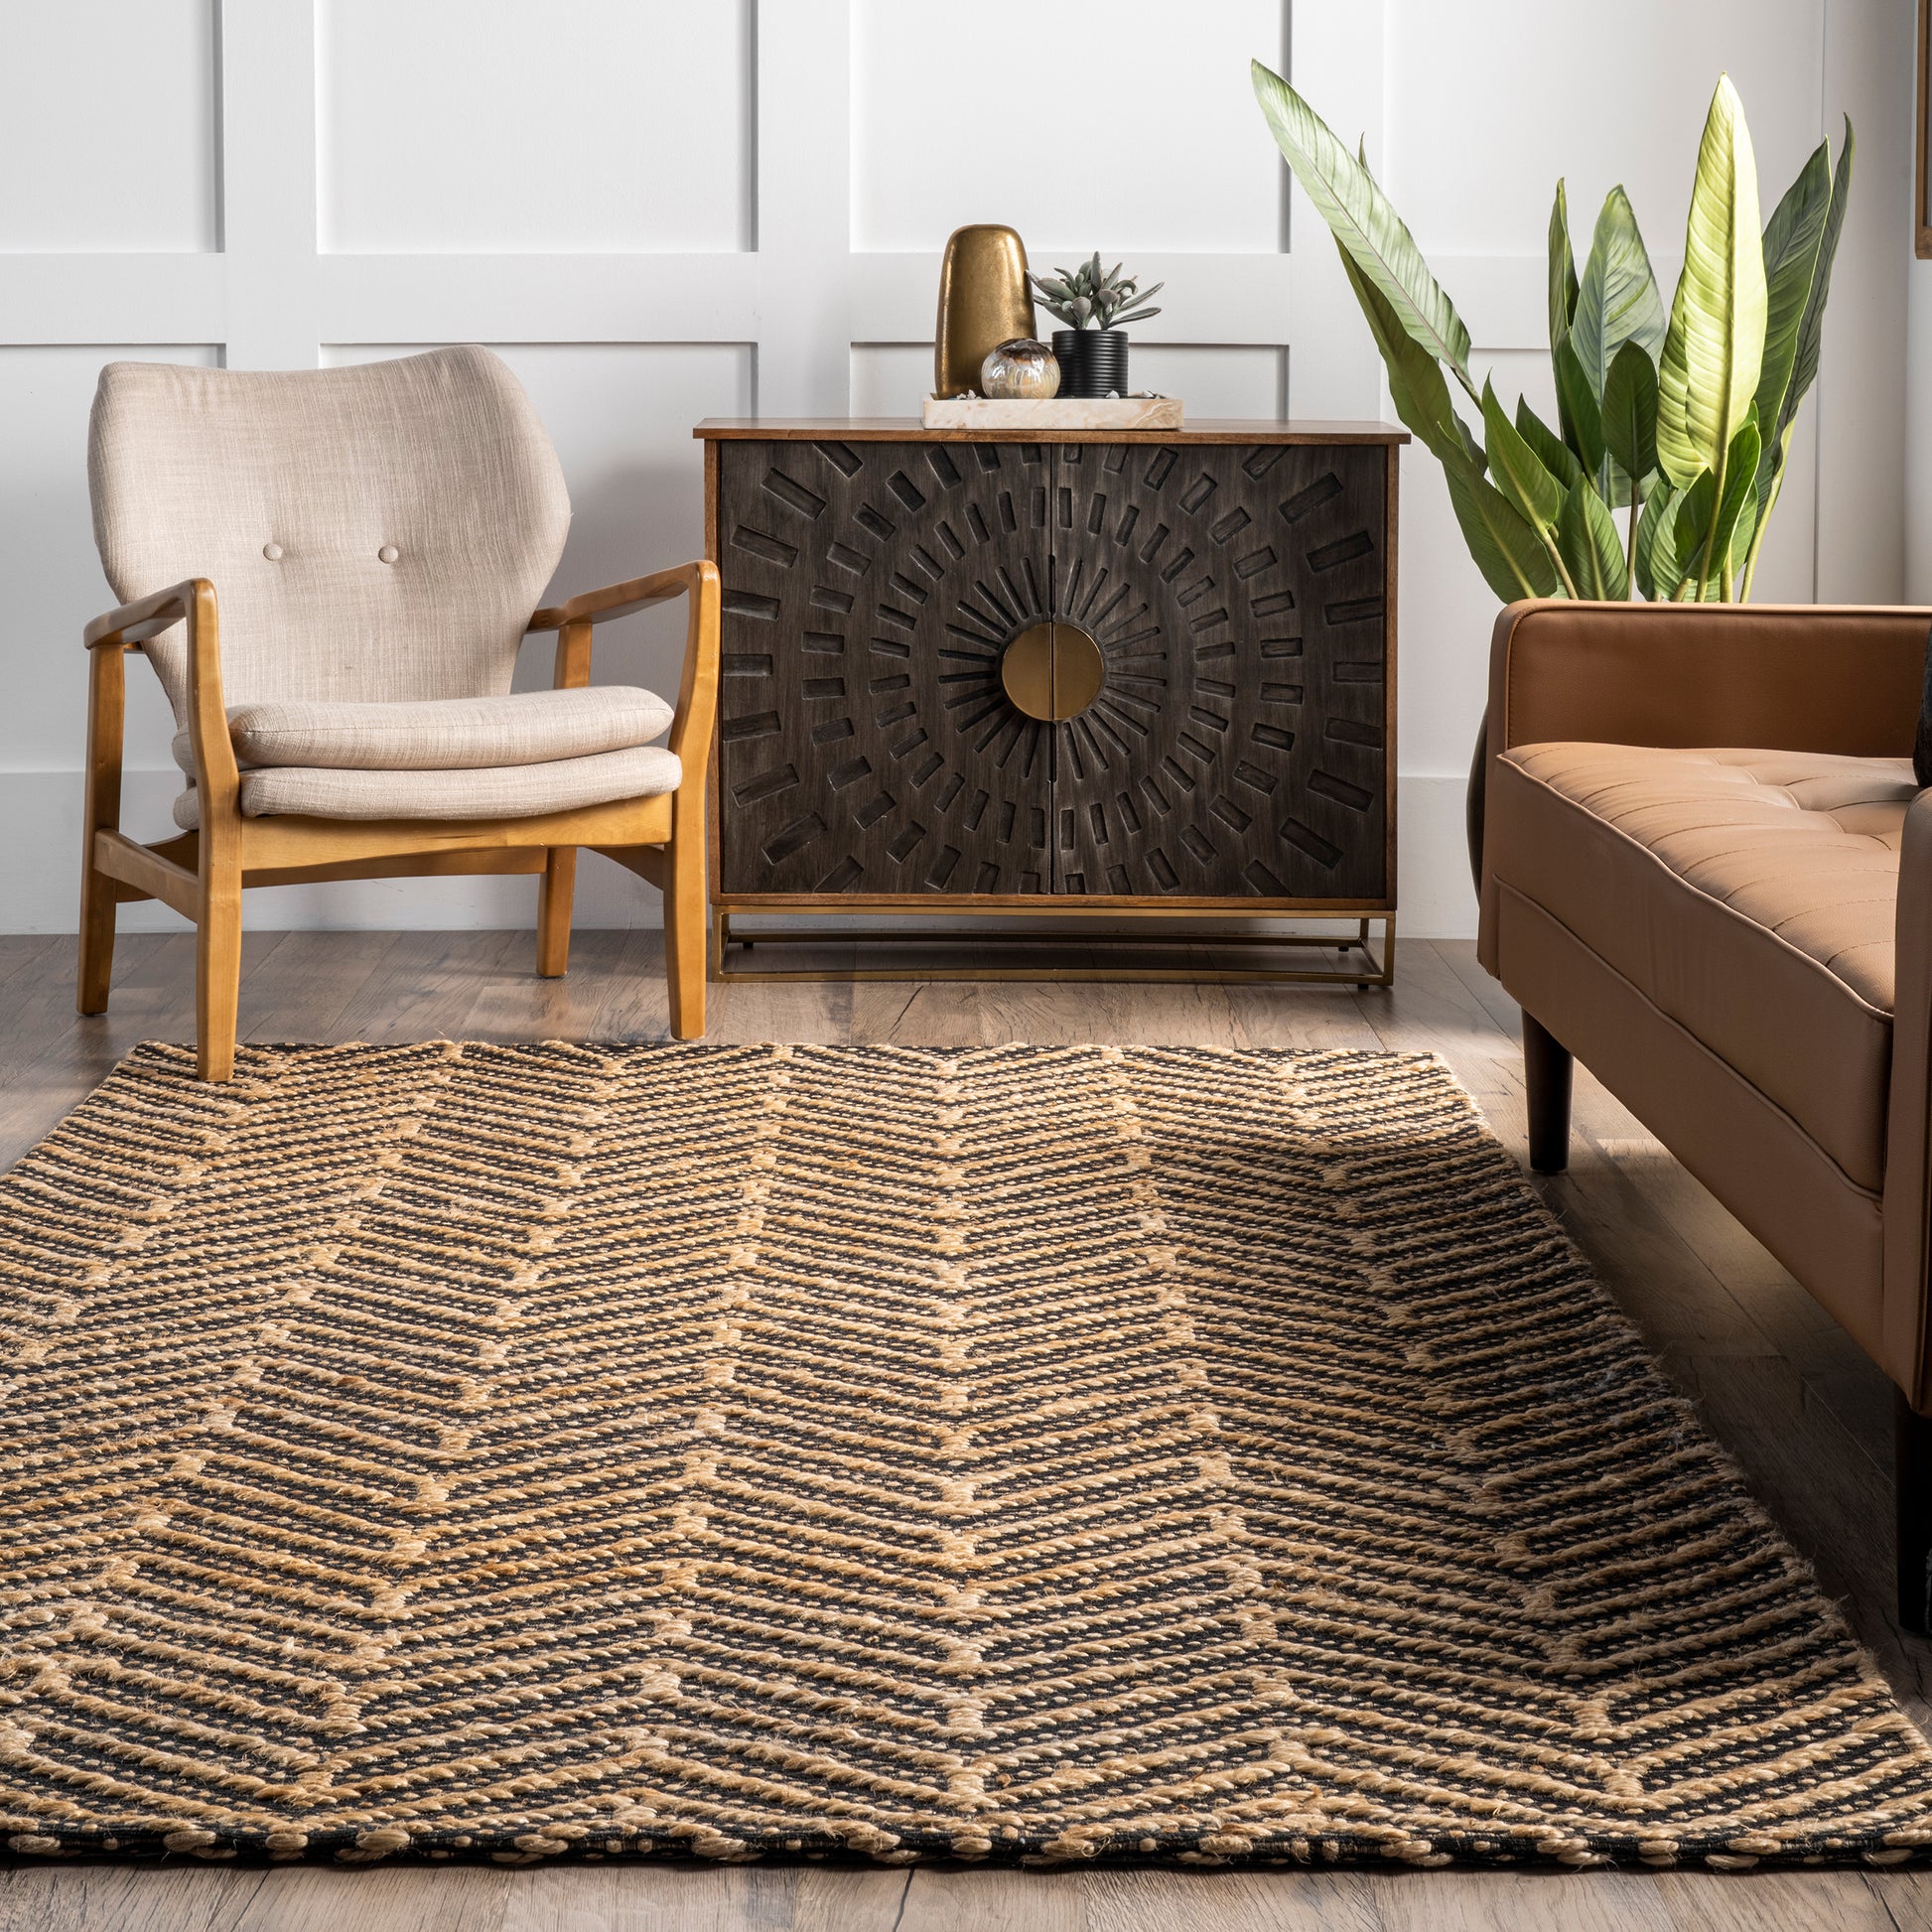 Nuloom Shelby Chevron Nsh3062A Natural Area Rug